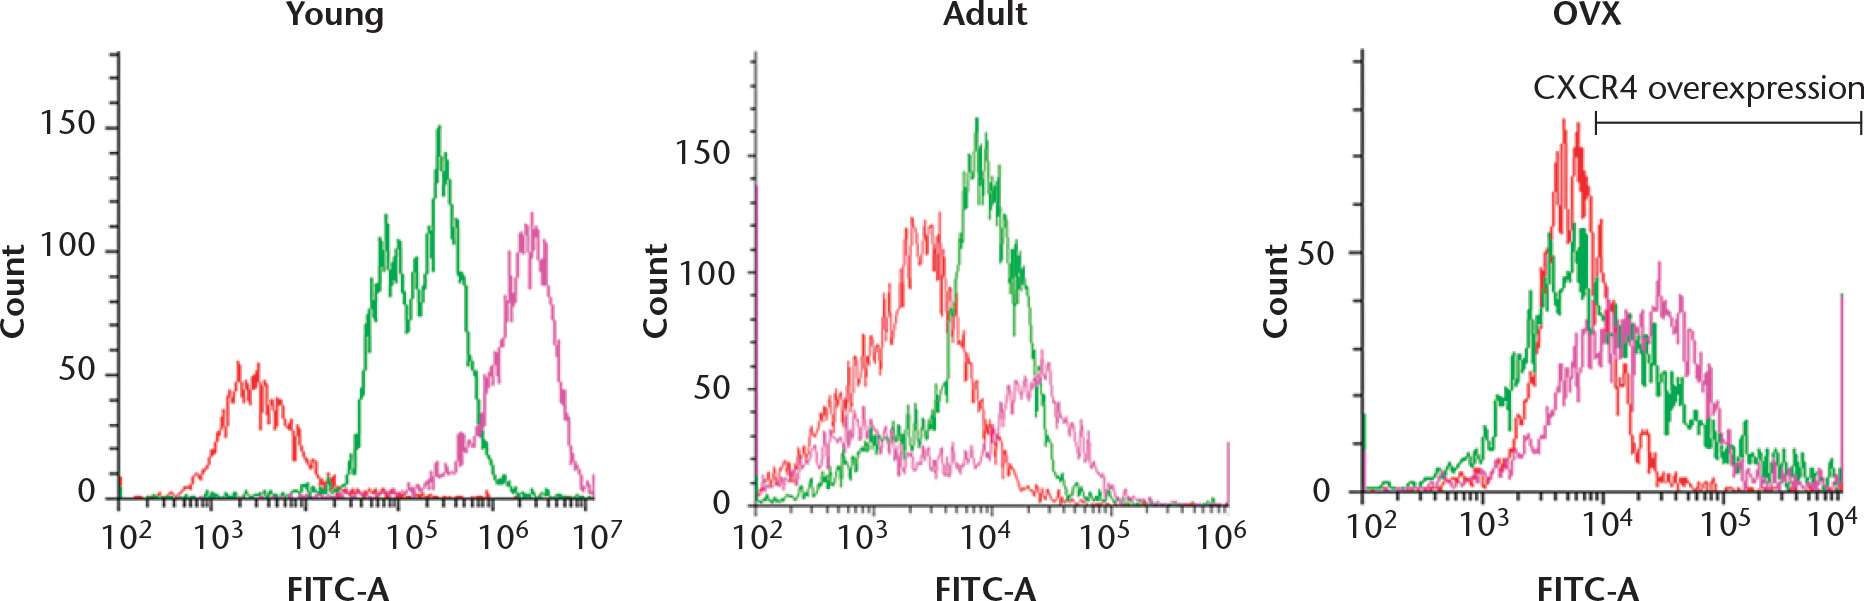 Fig. 2 
            Flow cytometry showing the chemokine receptor type 4 (CXCR4) expression of mesenchymal stem cells (MSCs) from young, adult control and ovariectomised (OVX) rats. The histograms show a comparison between the isotype control (red), CXCR4 expression in uninfected MSCs (green) and the over-expression of CXCR4 after transfection with the adenovirus (pink).
          